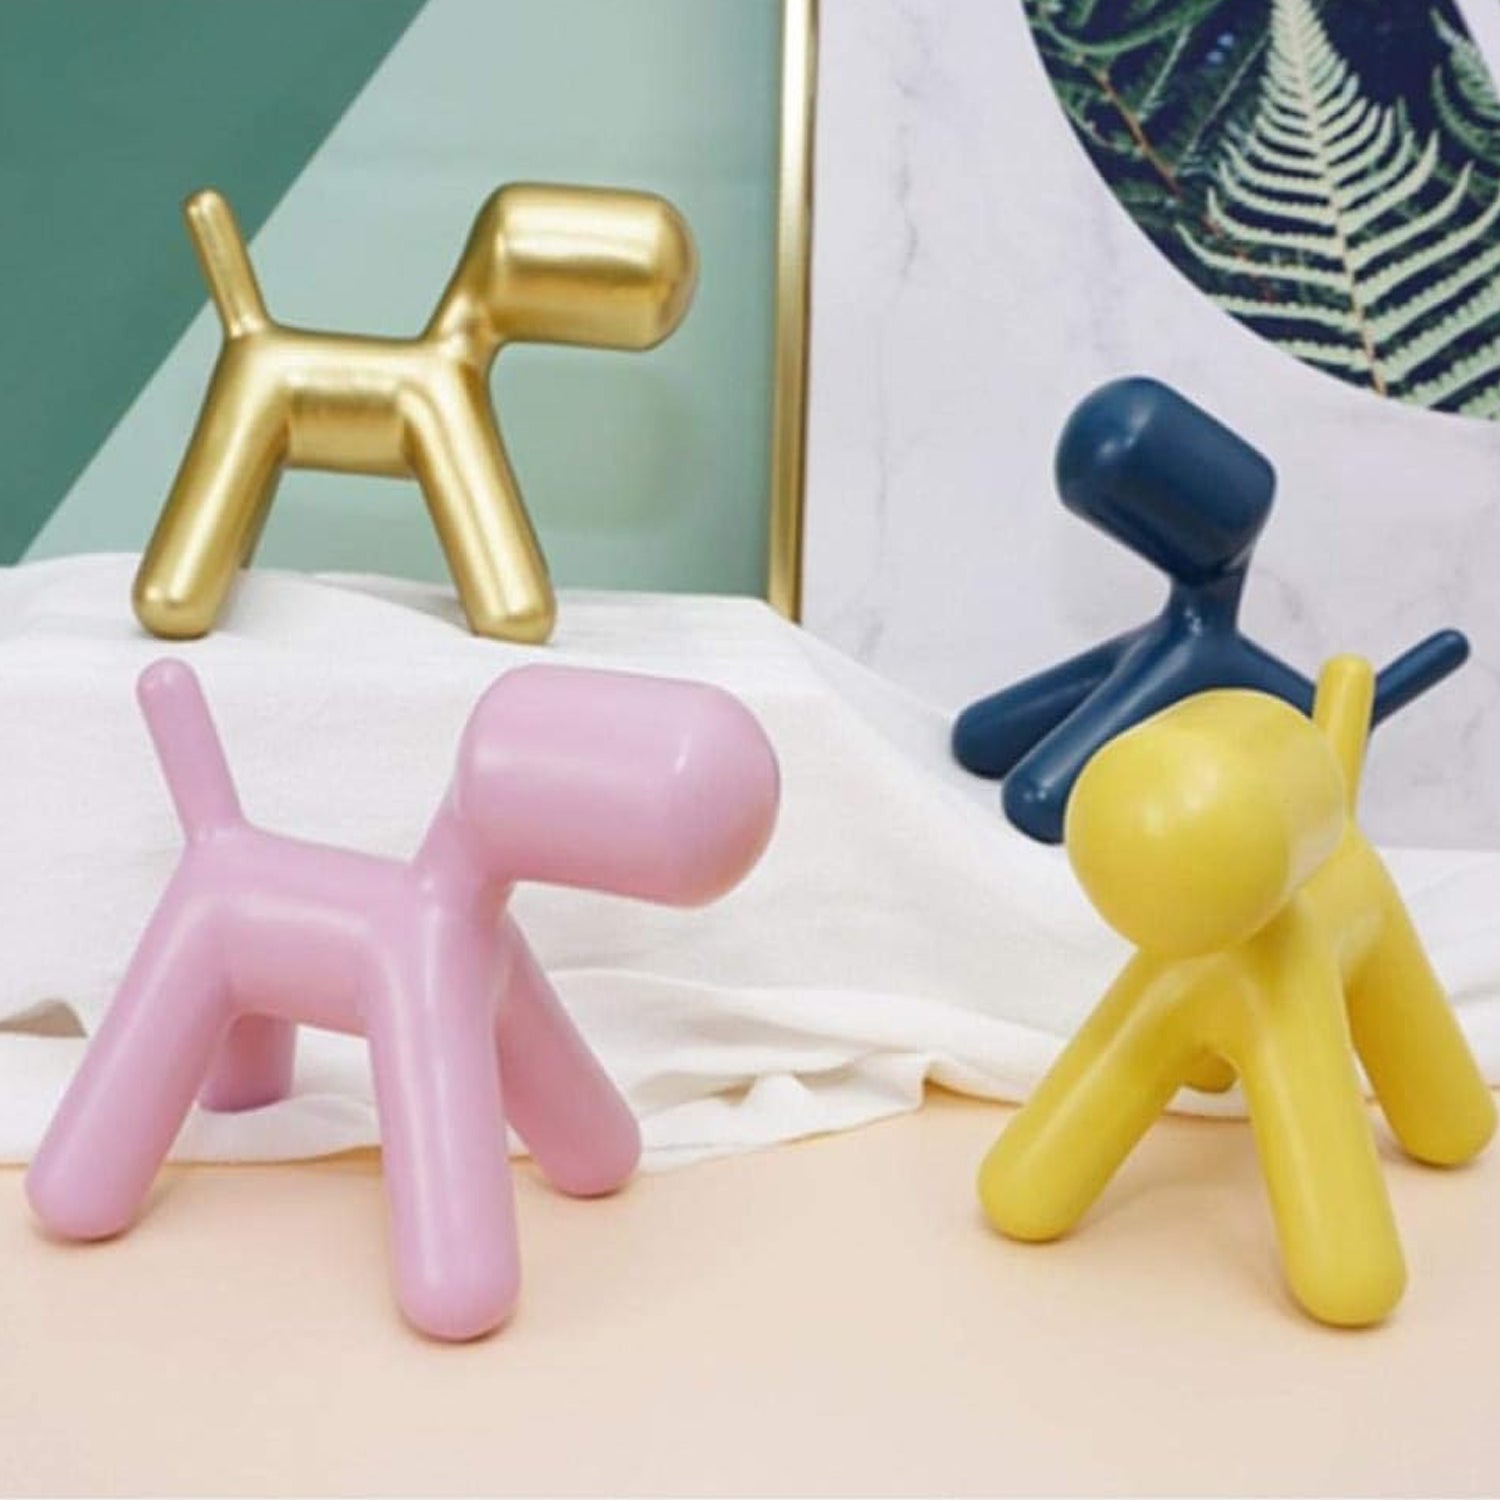 4315 Plastic Cute Animal Puppy Chair,Creative Dog Low Footstool,Cartoon Foot Rest Stool for Bedroom Living Room Entrance Gift (1 Pc)